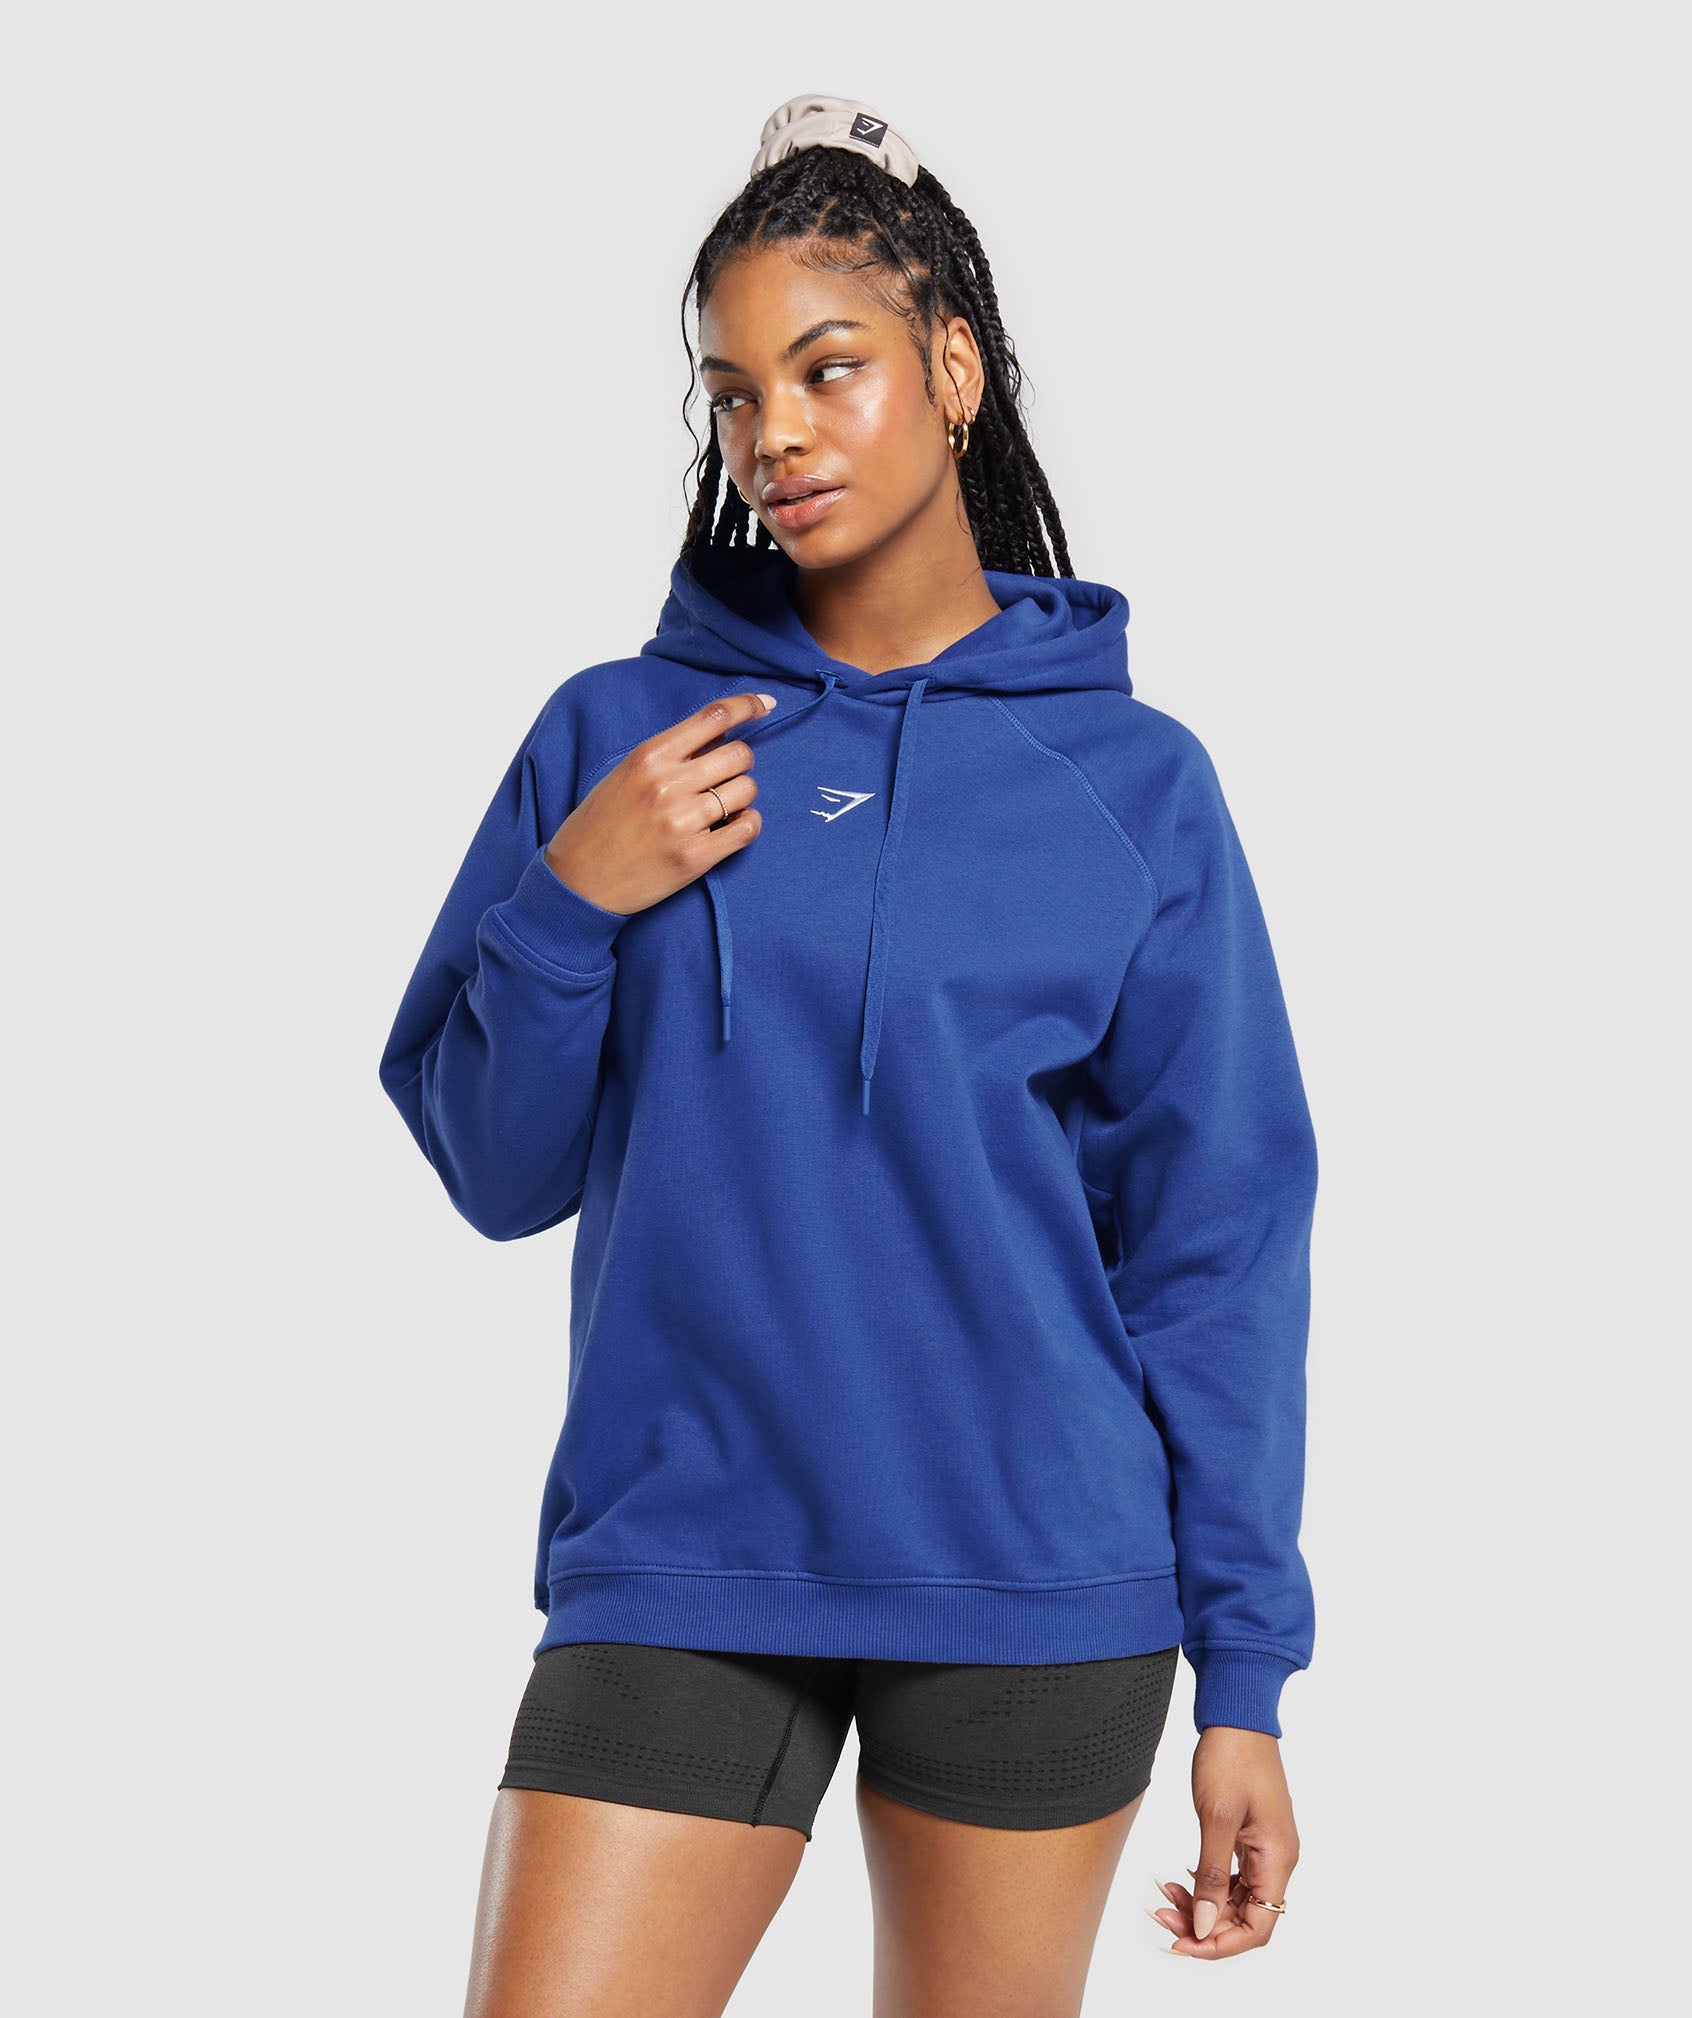 Training Oversized Fleece Hoodie in Wave Blue is out of stock